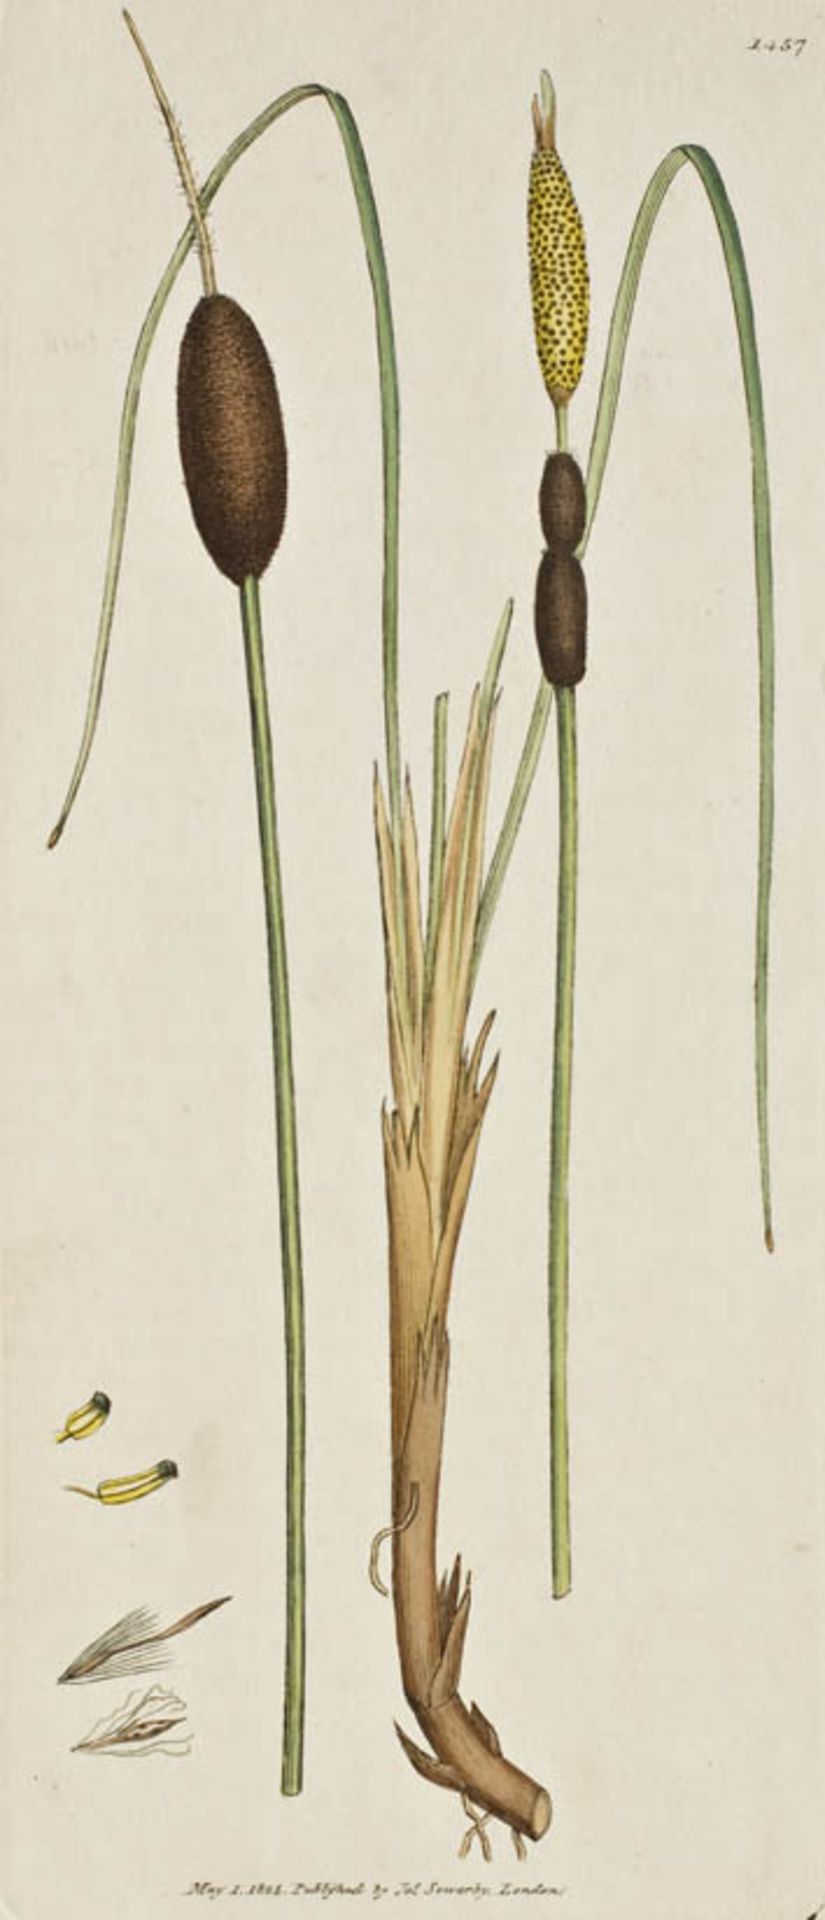 Botanik.- (Smith, J.E. English Botany; or, coloured figures of british plants with their essential